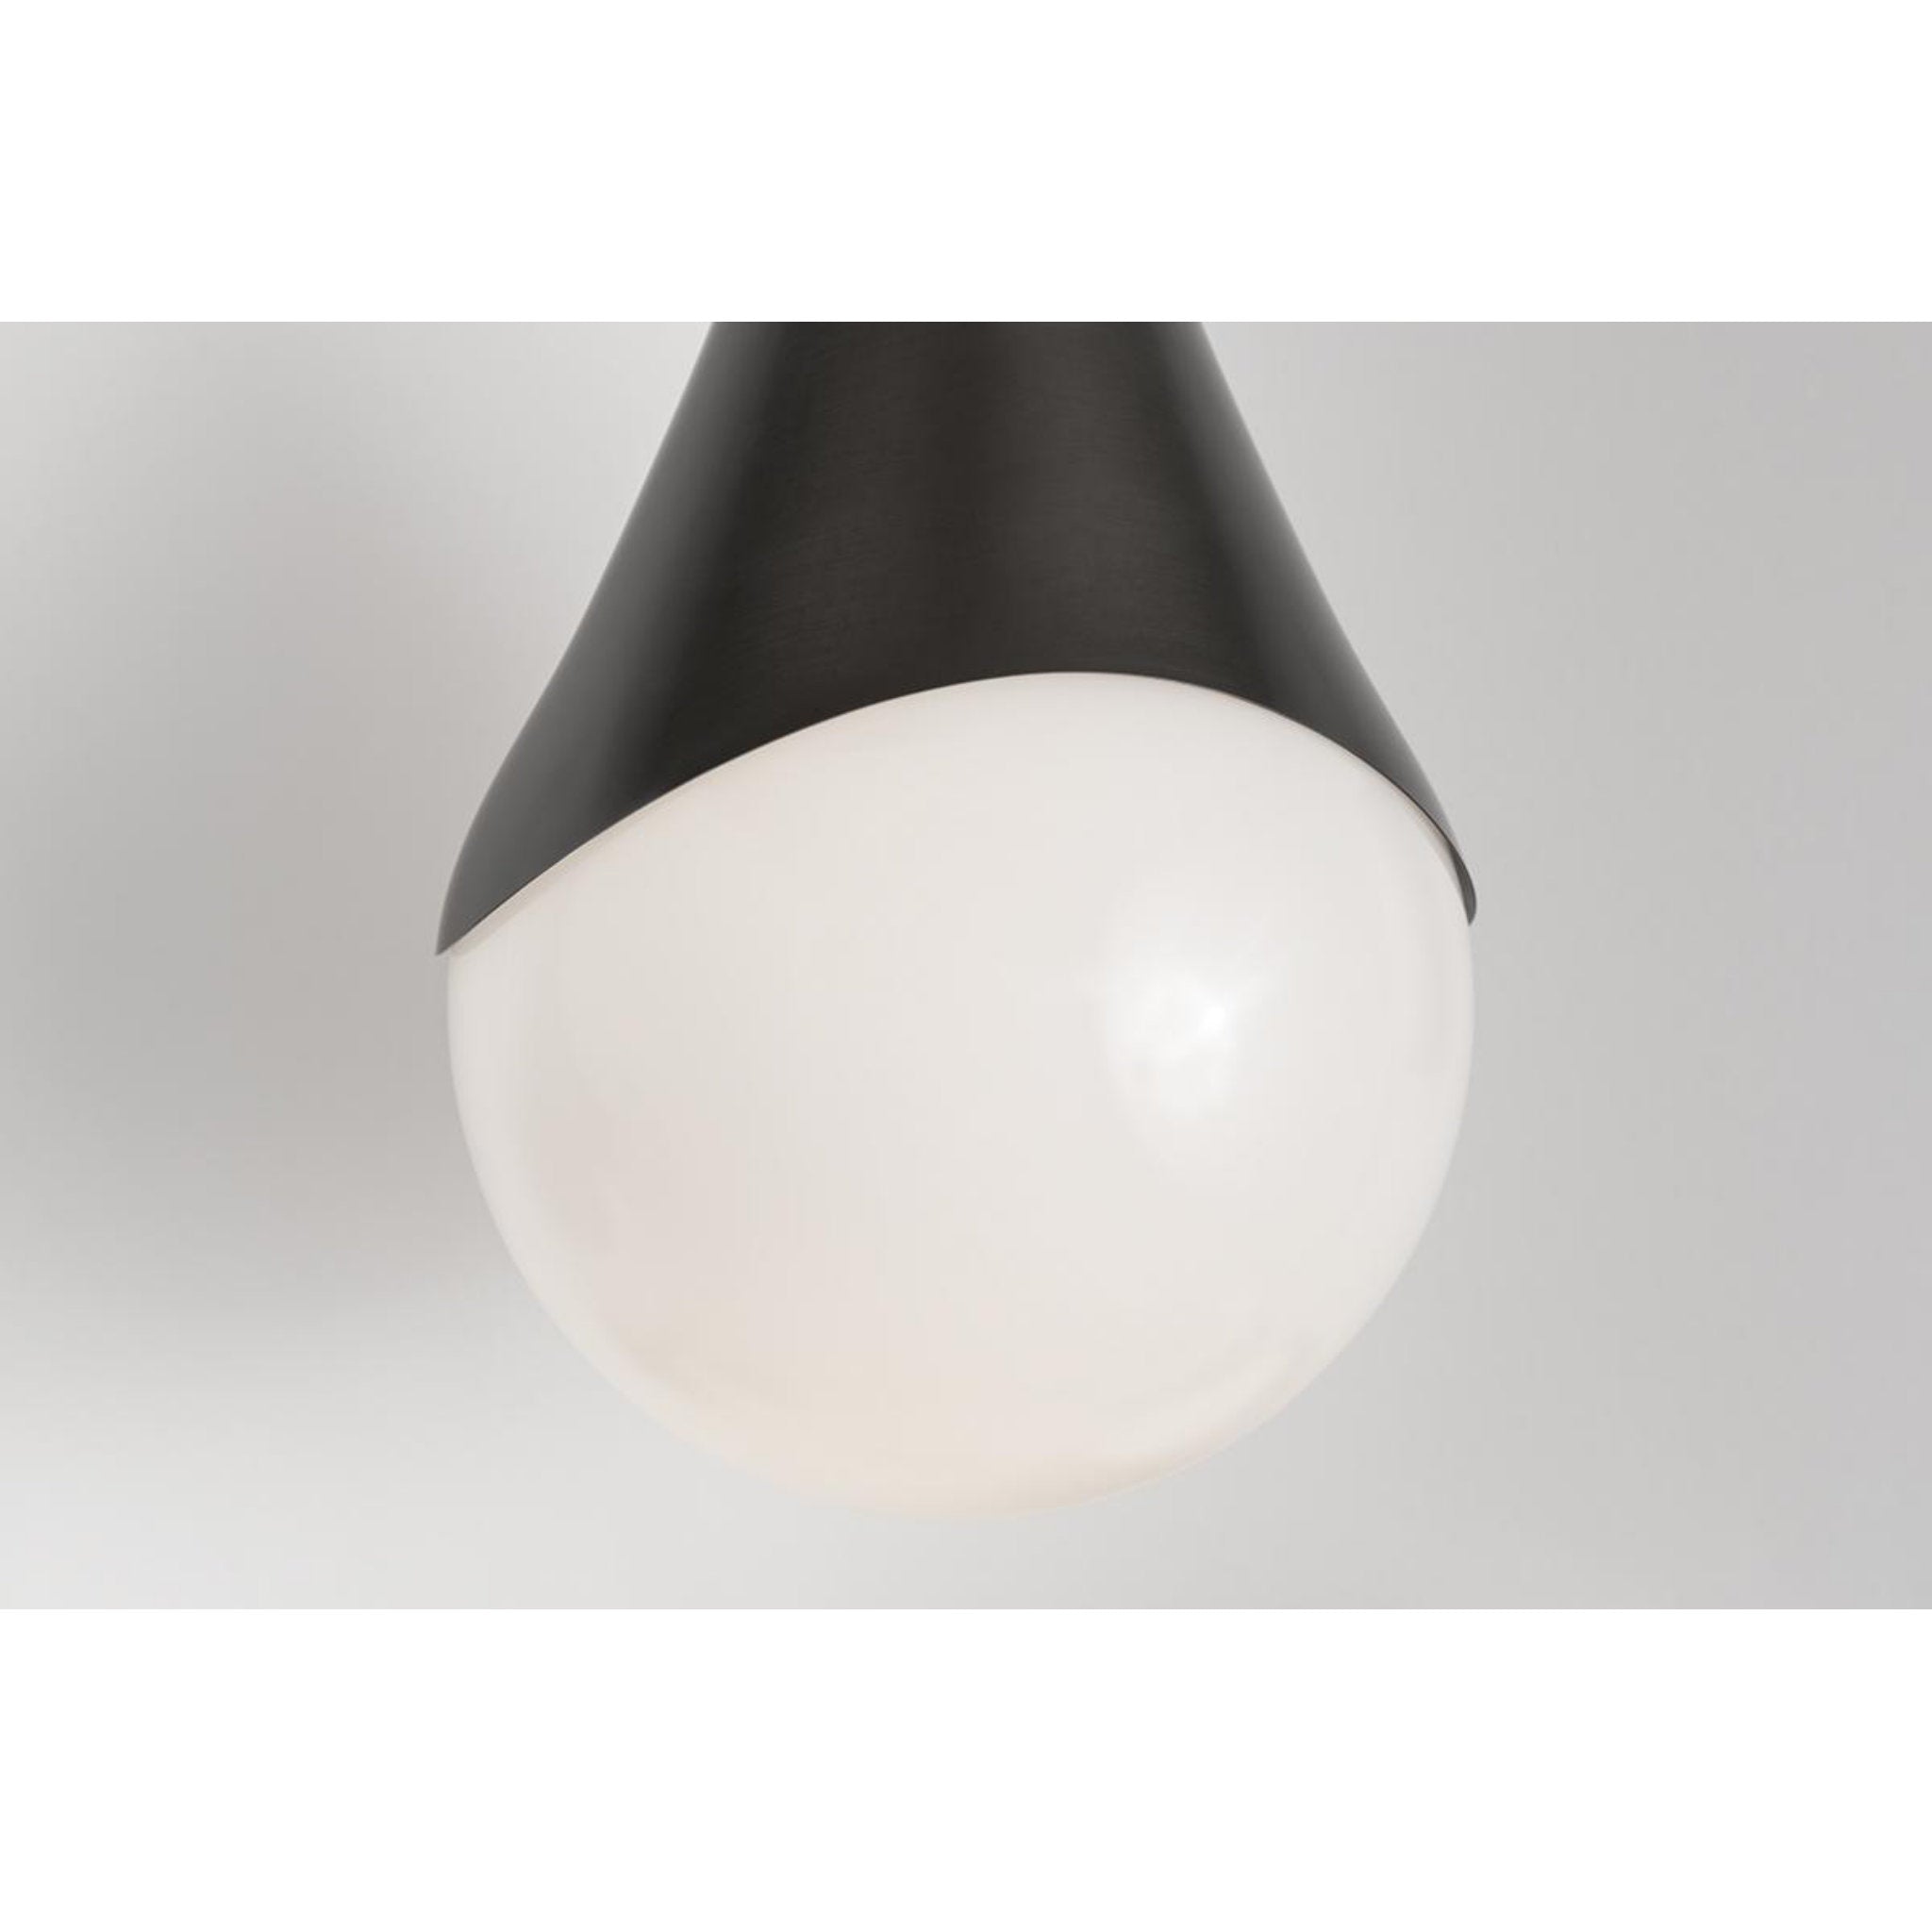 Ariana 1-Light Pendant in Polished Nickel